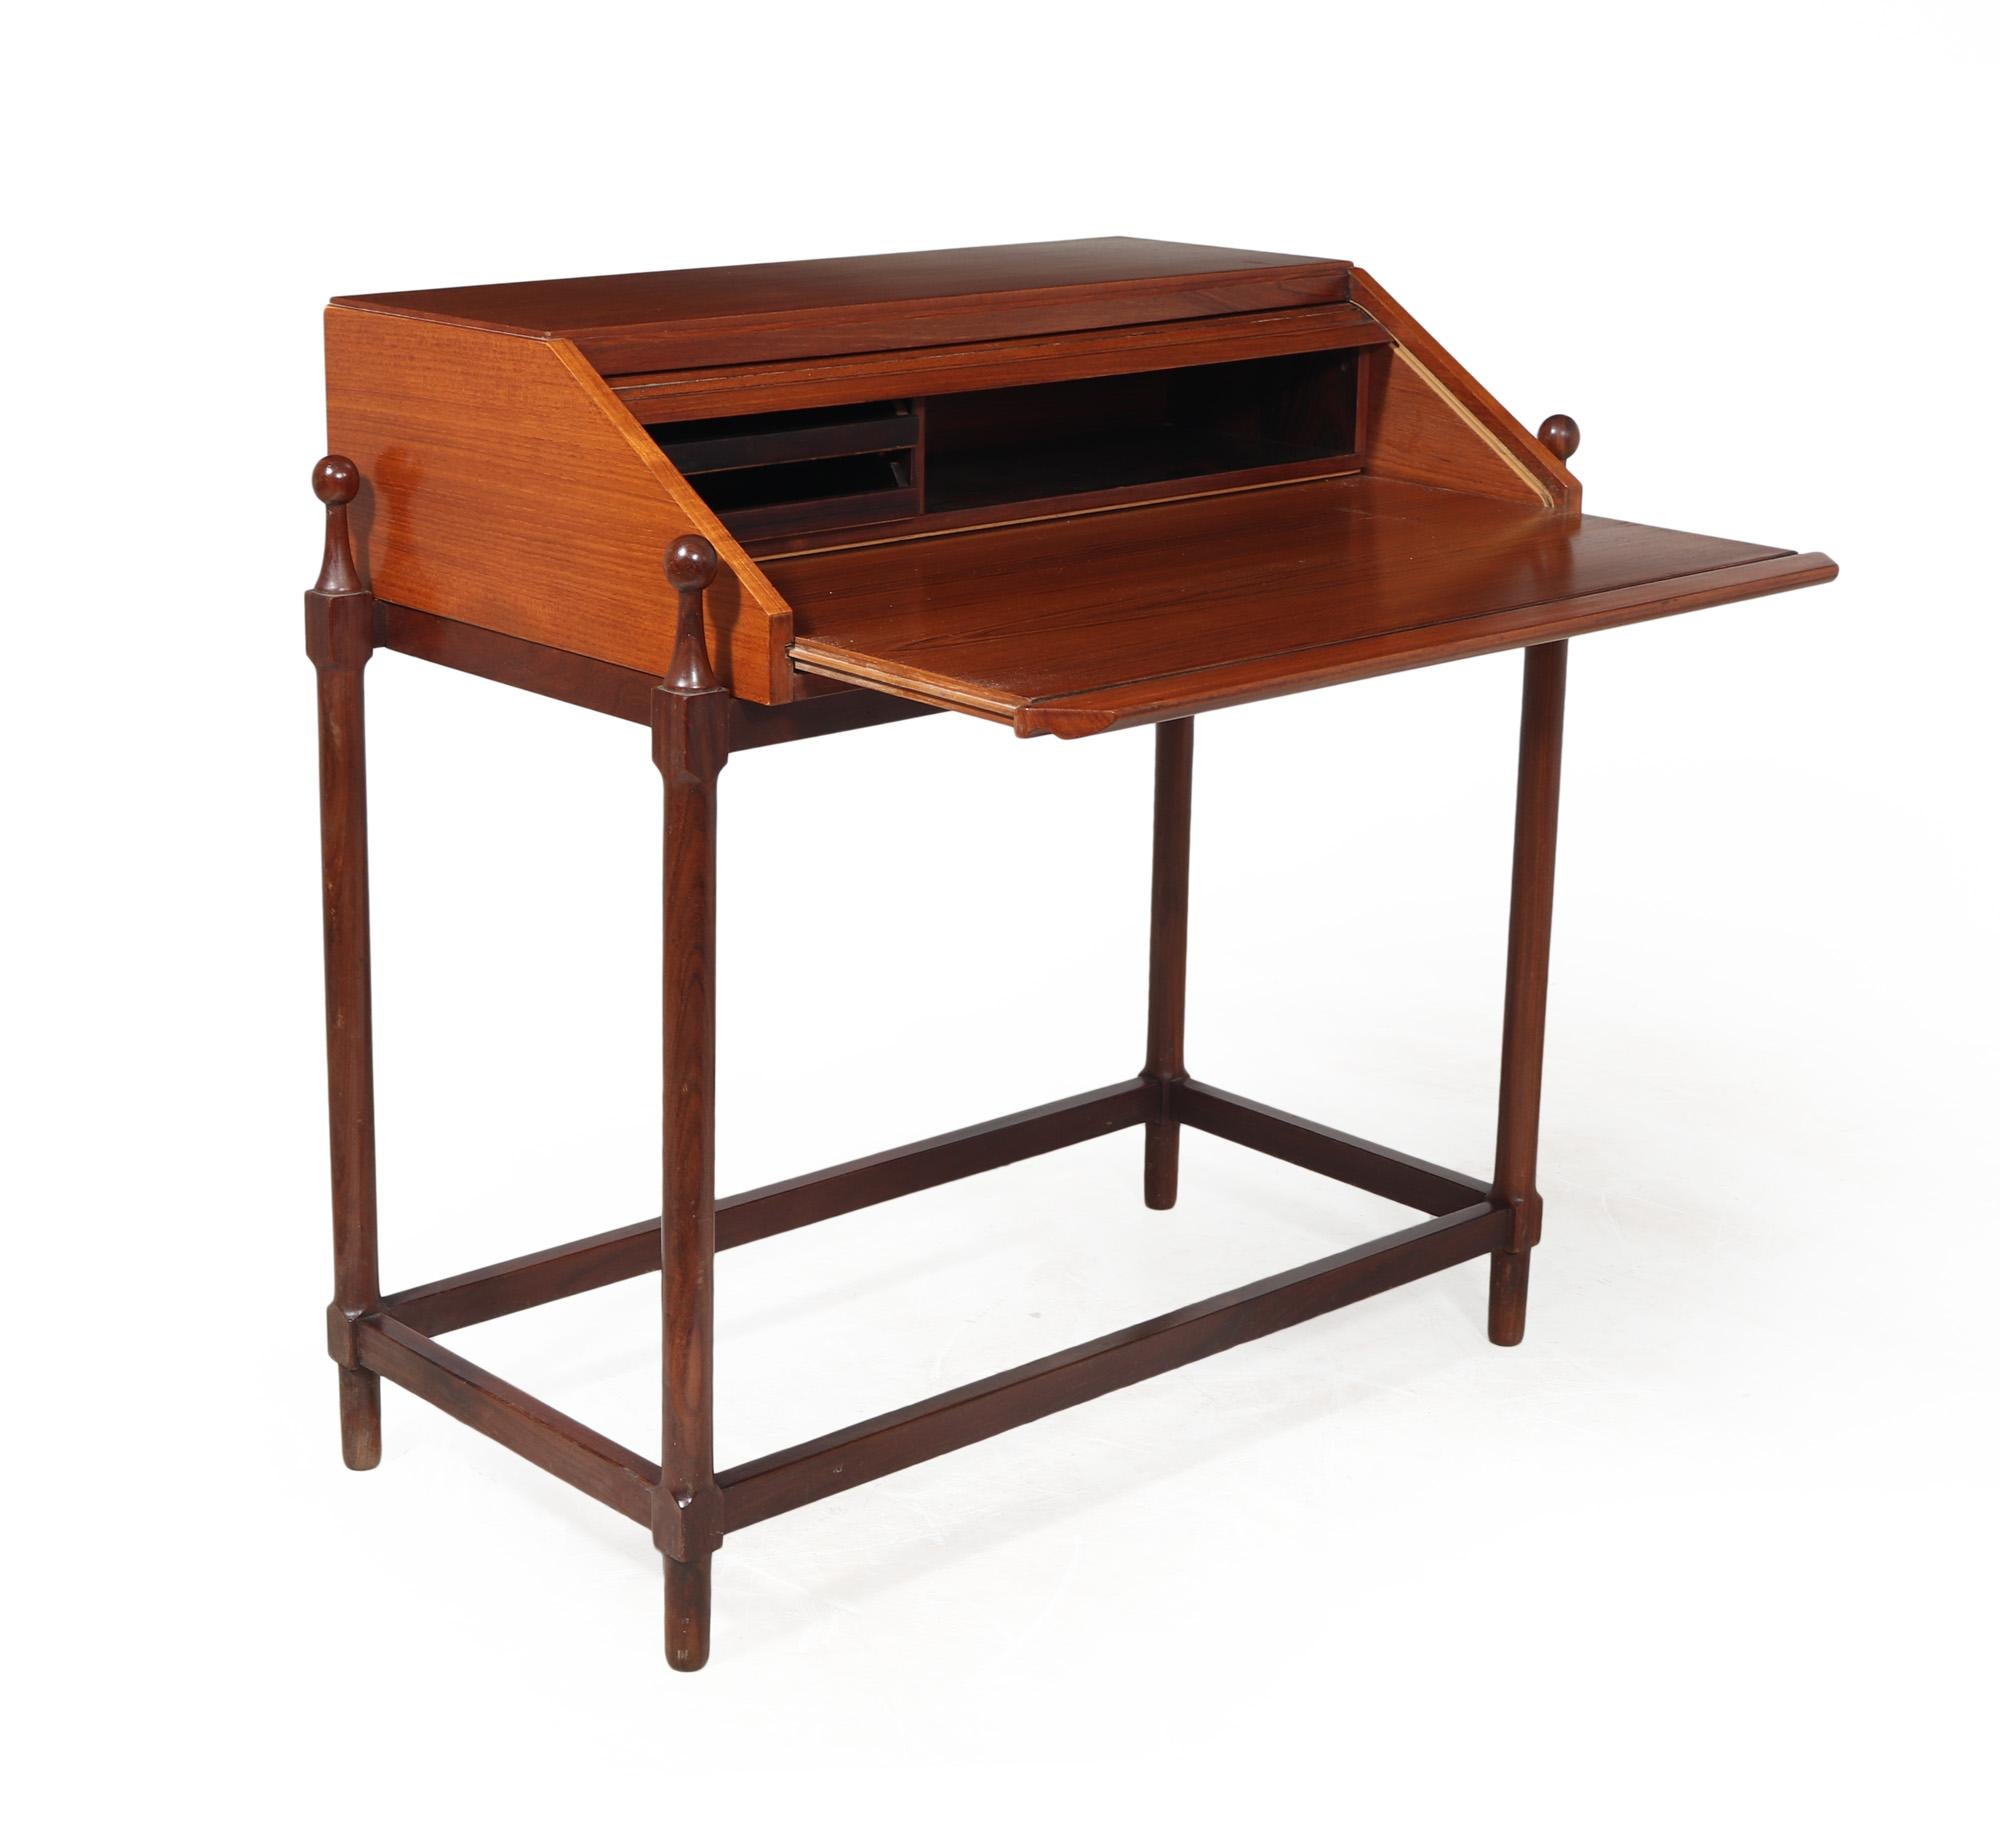 DESK BY FRATELLI PROSERPIO
This vintage Modernist writing desk produced in Italy in the 1960's by Fratelli Proserpio. It features a unique tambour slide mechanism that reveals the writing surface when pulled out. Inside, there is a small shelf for a